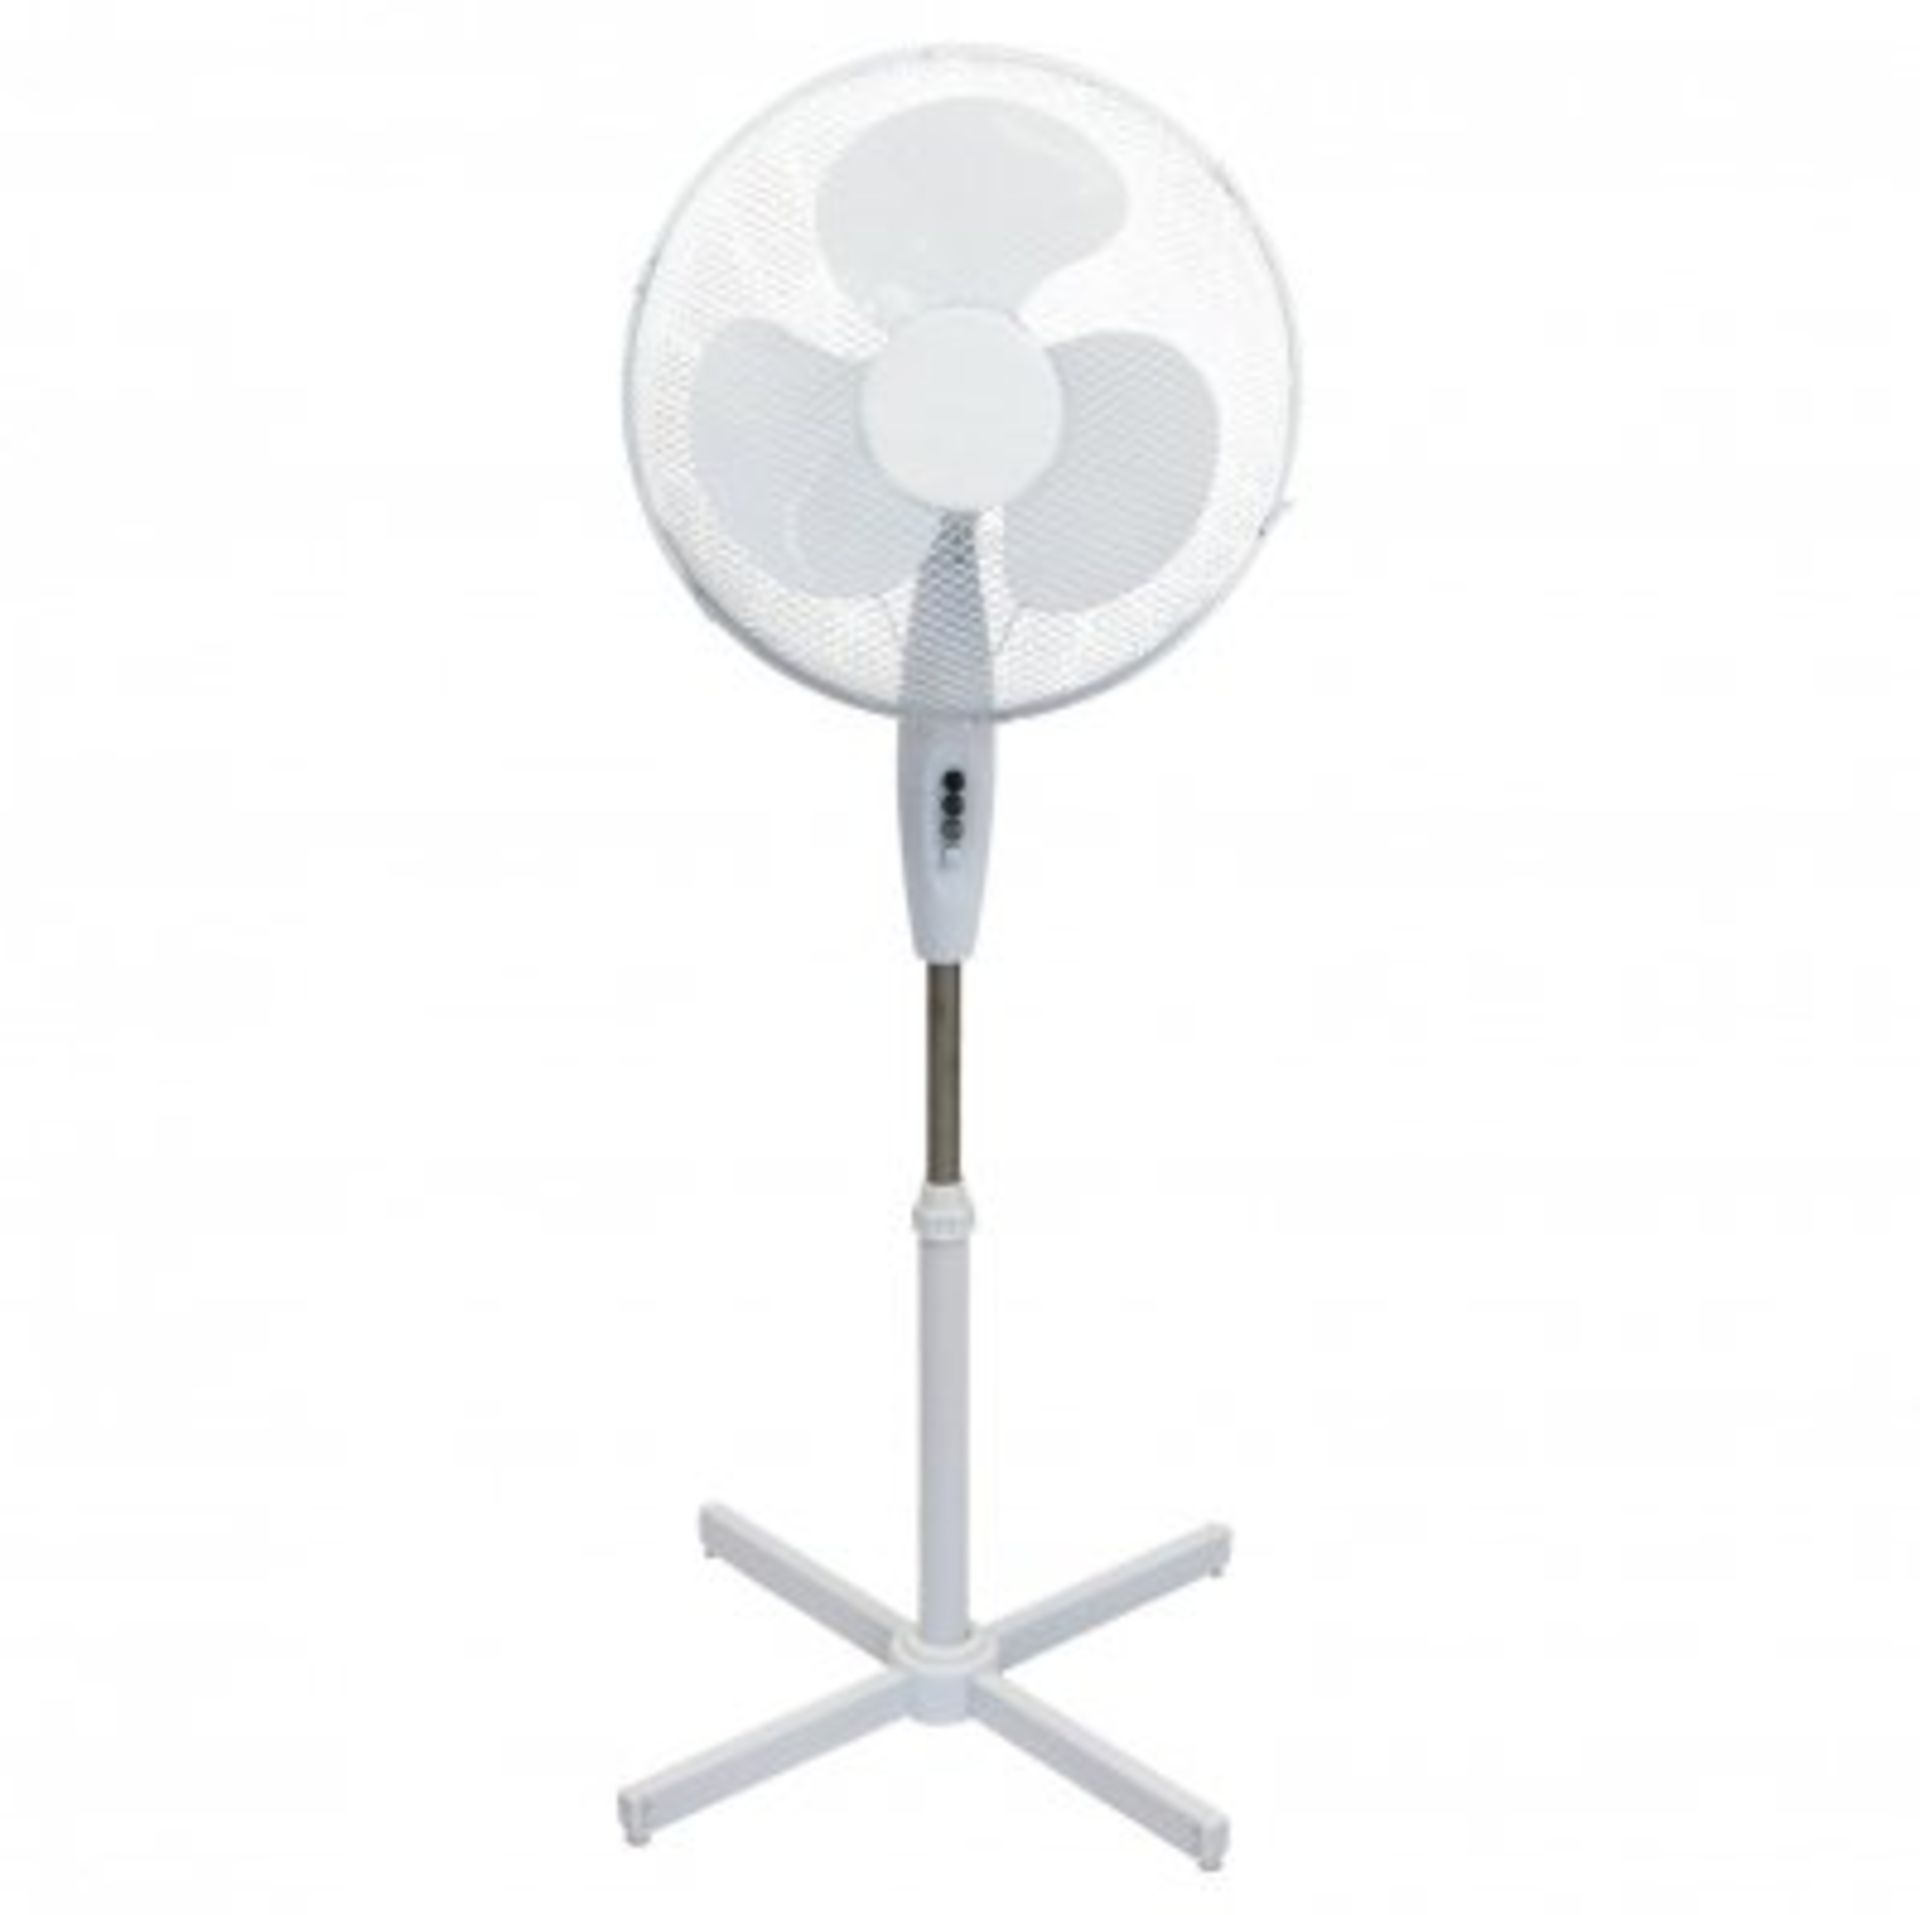 (ZP30) 16" Oscillating Pedestal Electric Fan The fan head oscillates and tilts which me...